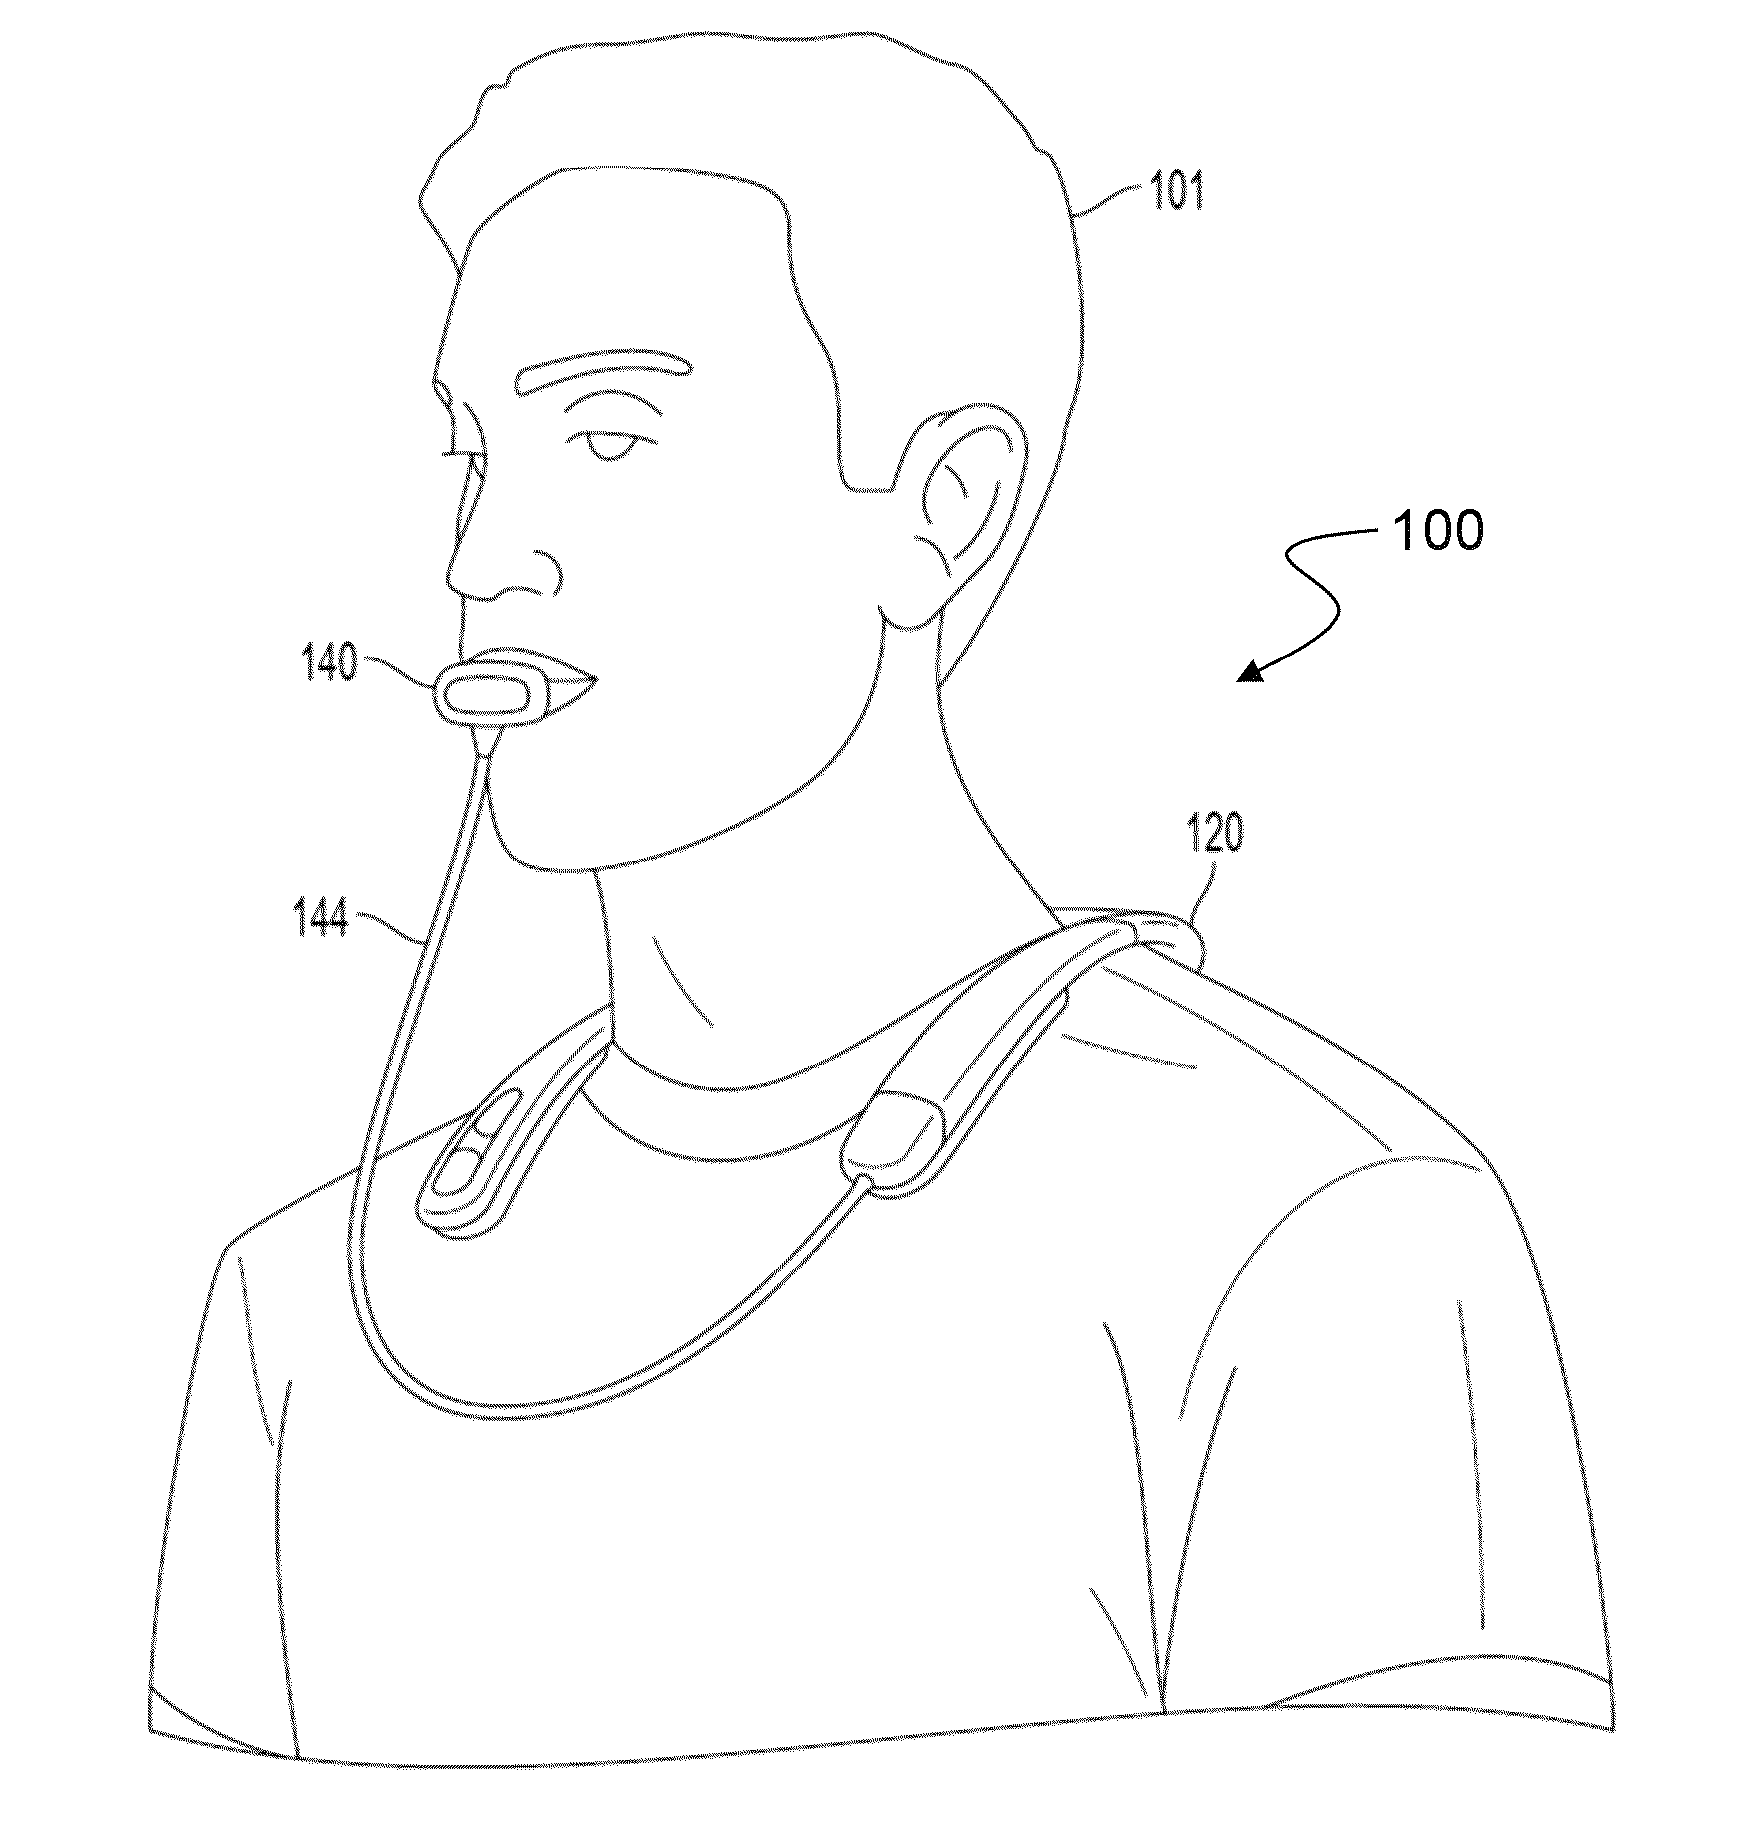 Methods of manufacturing devices for the neurorehabilitation of a patient